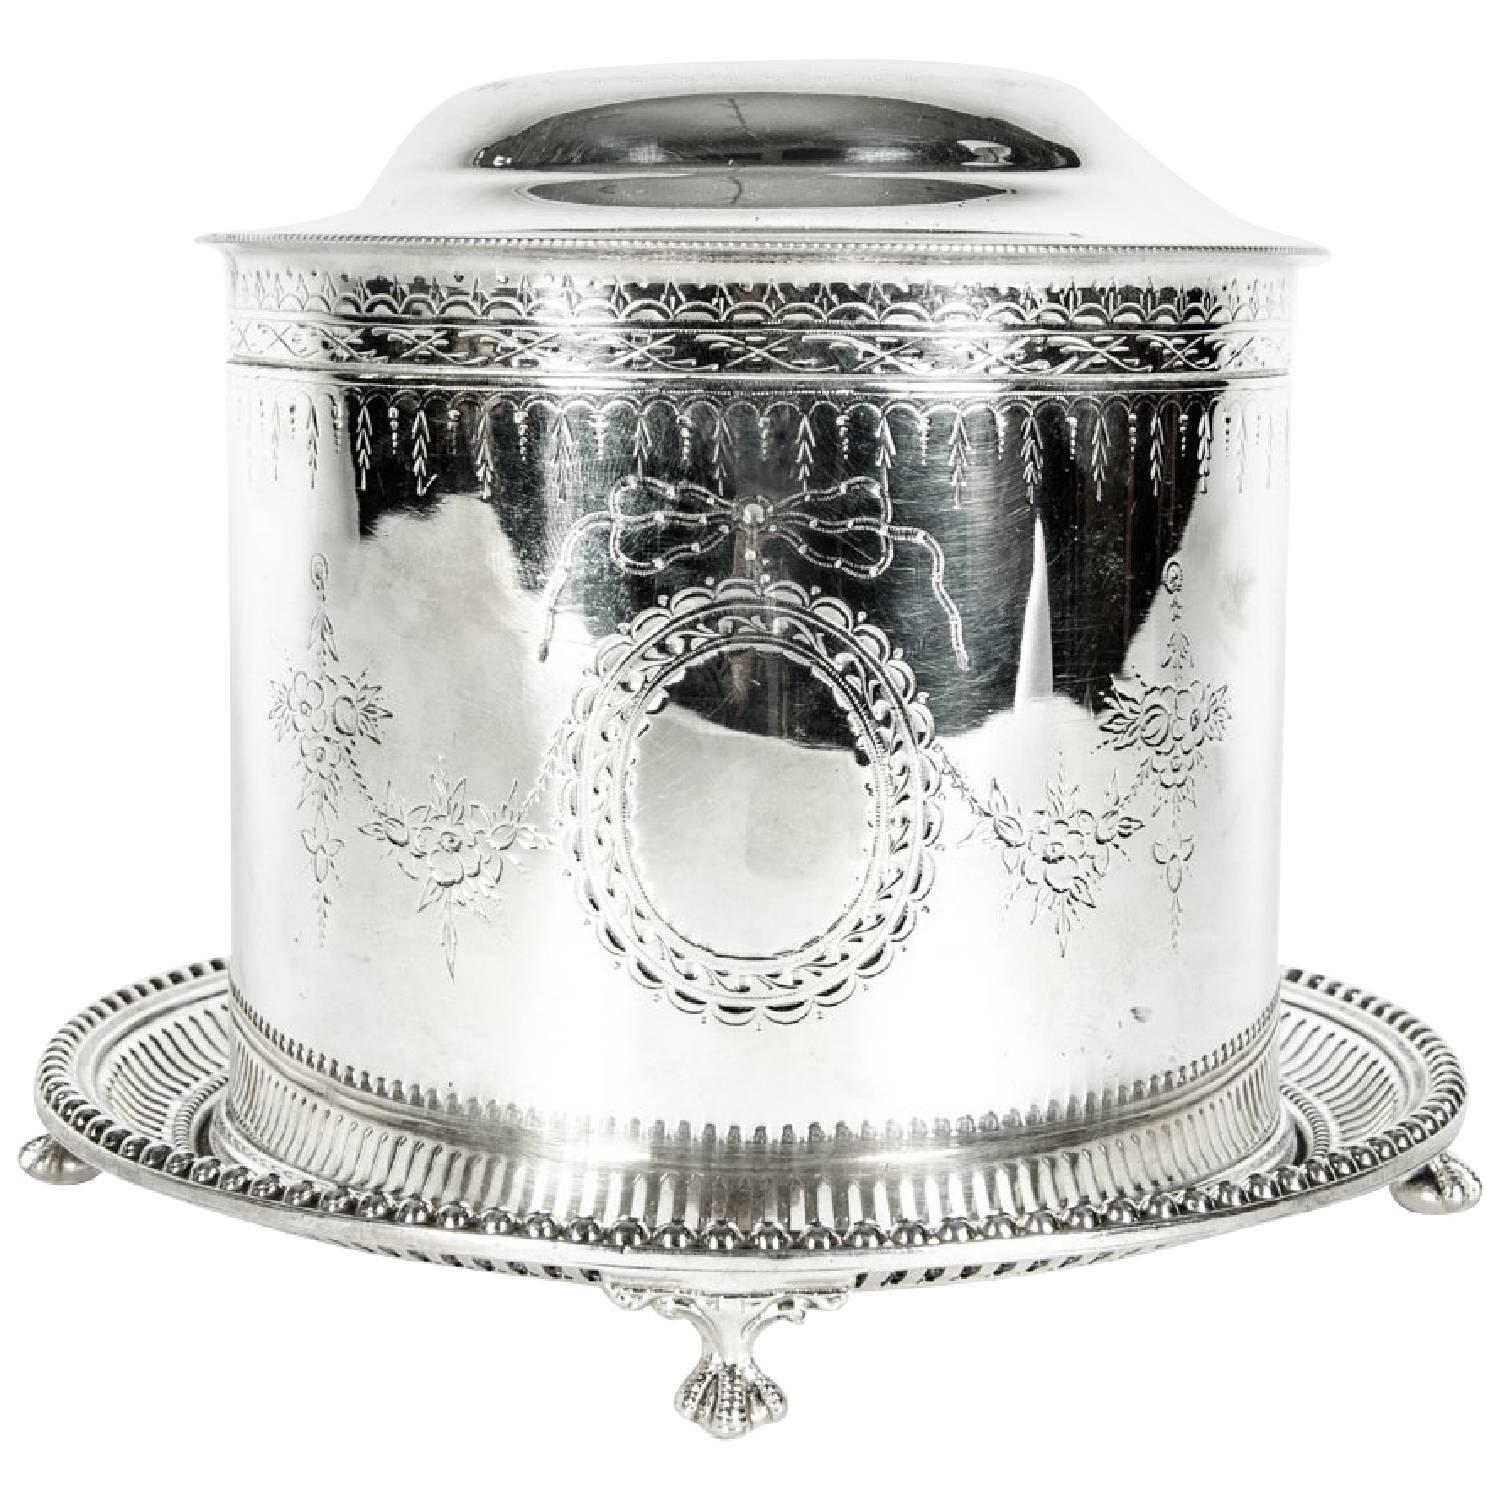 English Silver Plate Covered Biscuit Box/Tea Caddy